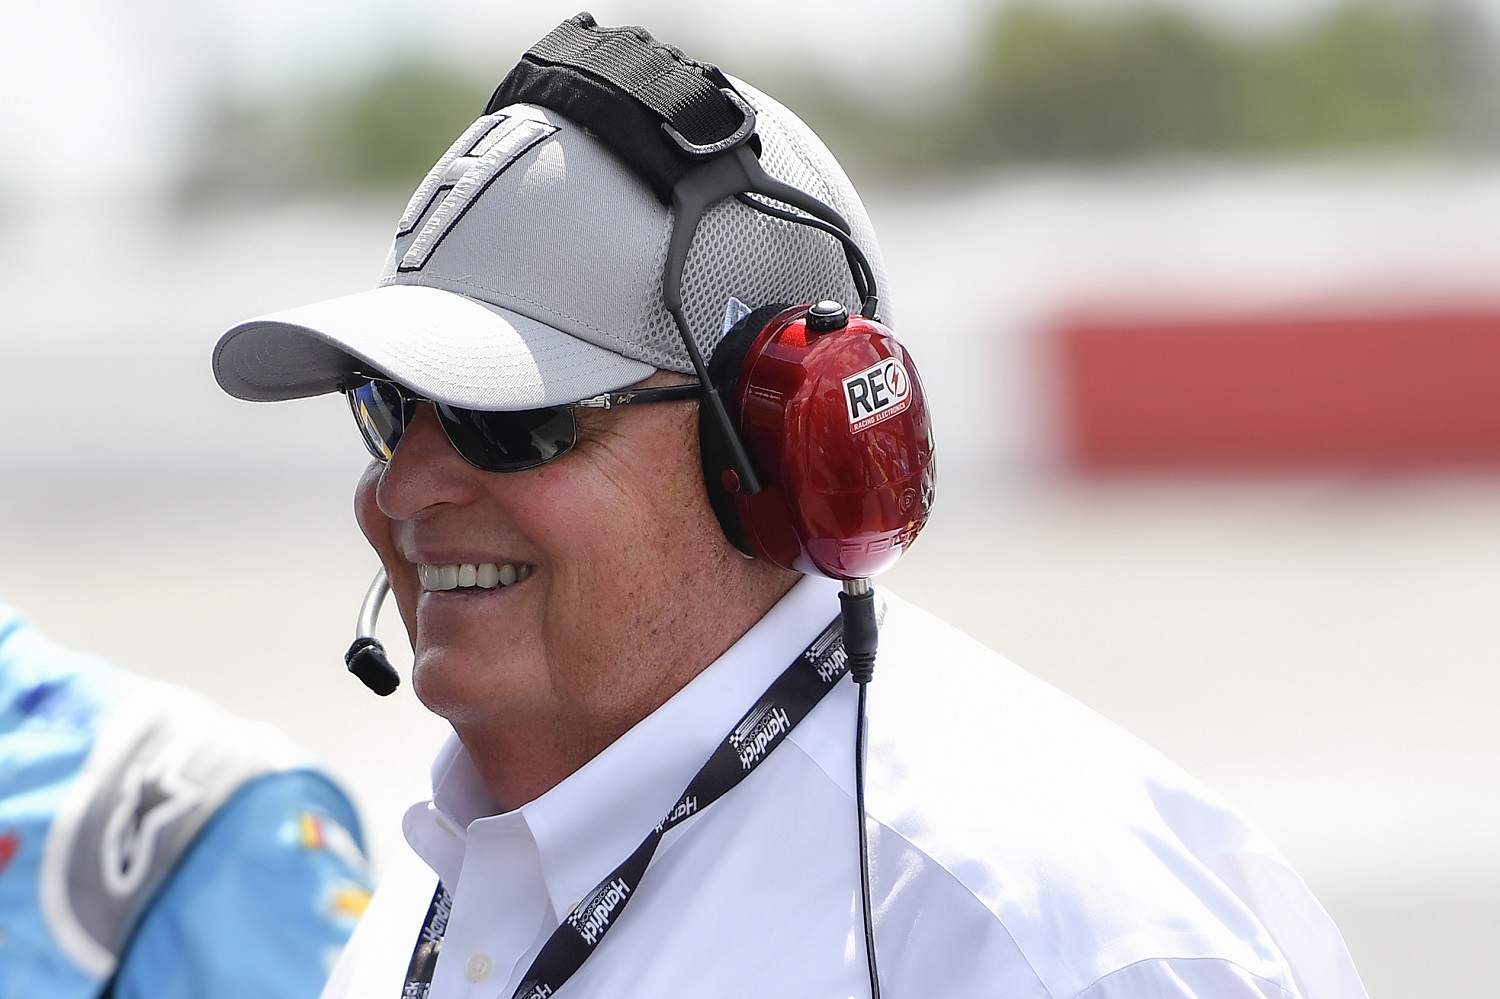 NASCAR Hall of Famer and HMS team owner Rick Hendrick looks on during practice for the NASCAR Cup Series Cook Out Southern 500 at Darlington Raceway on Sept. 3, 2022, in Darlington, South Carolina.